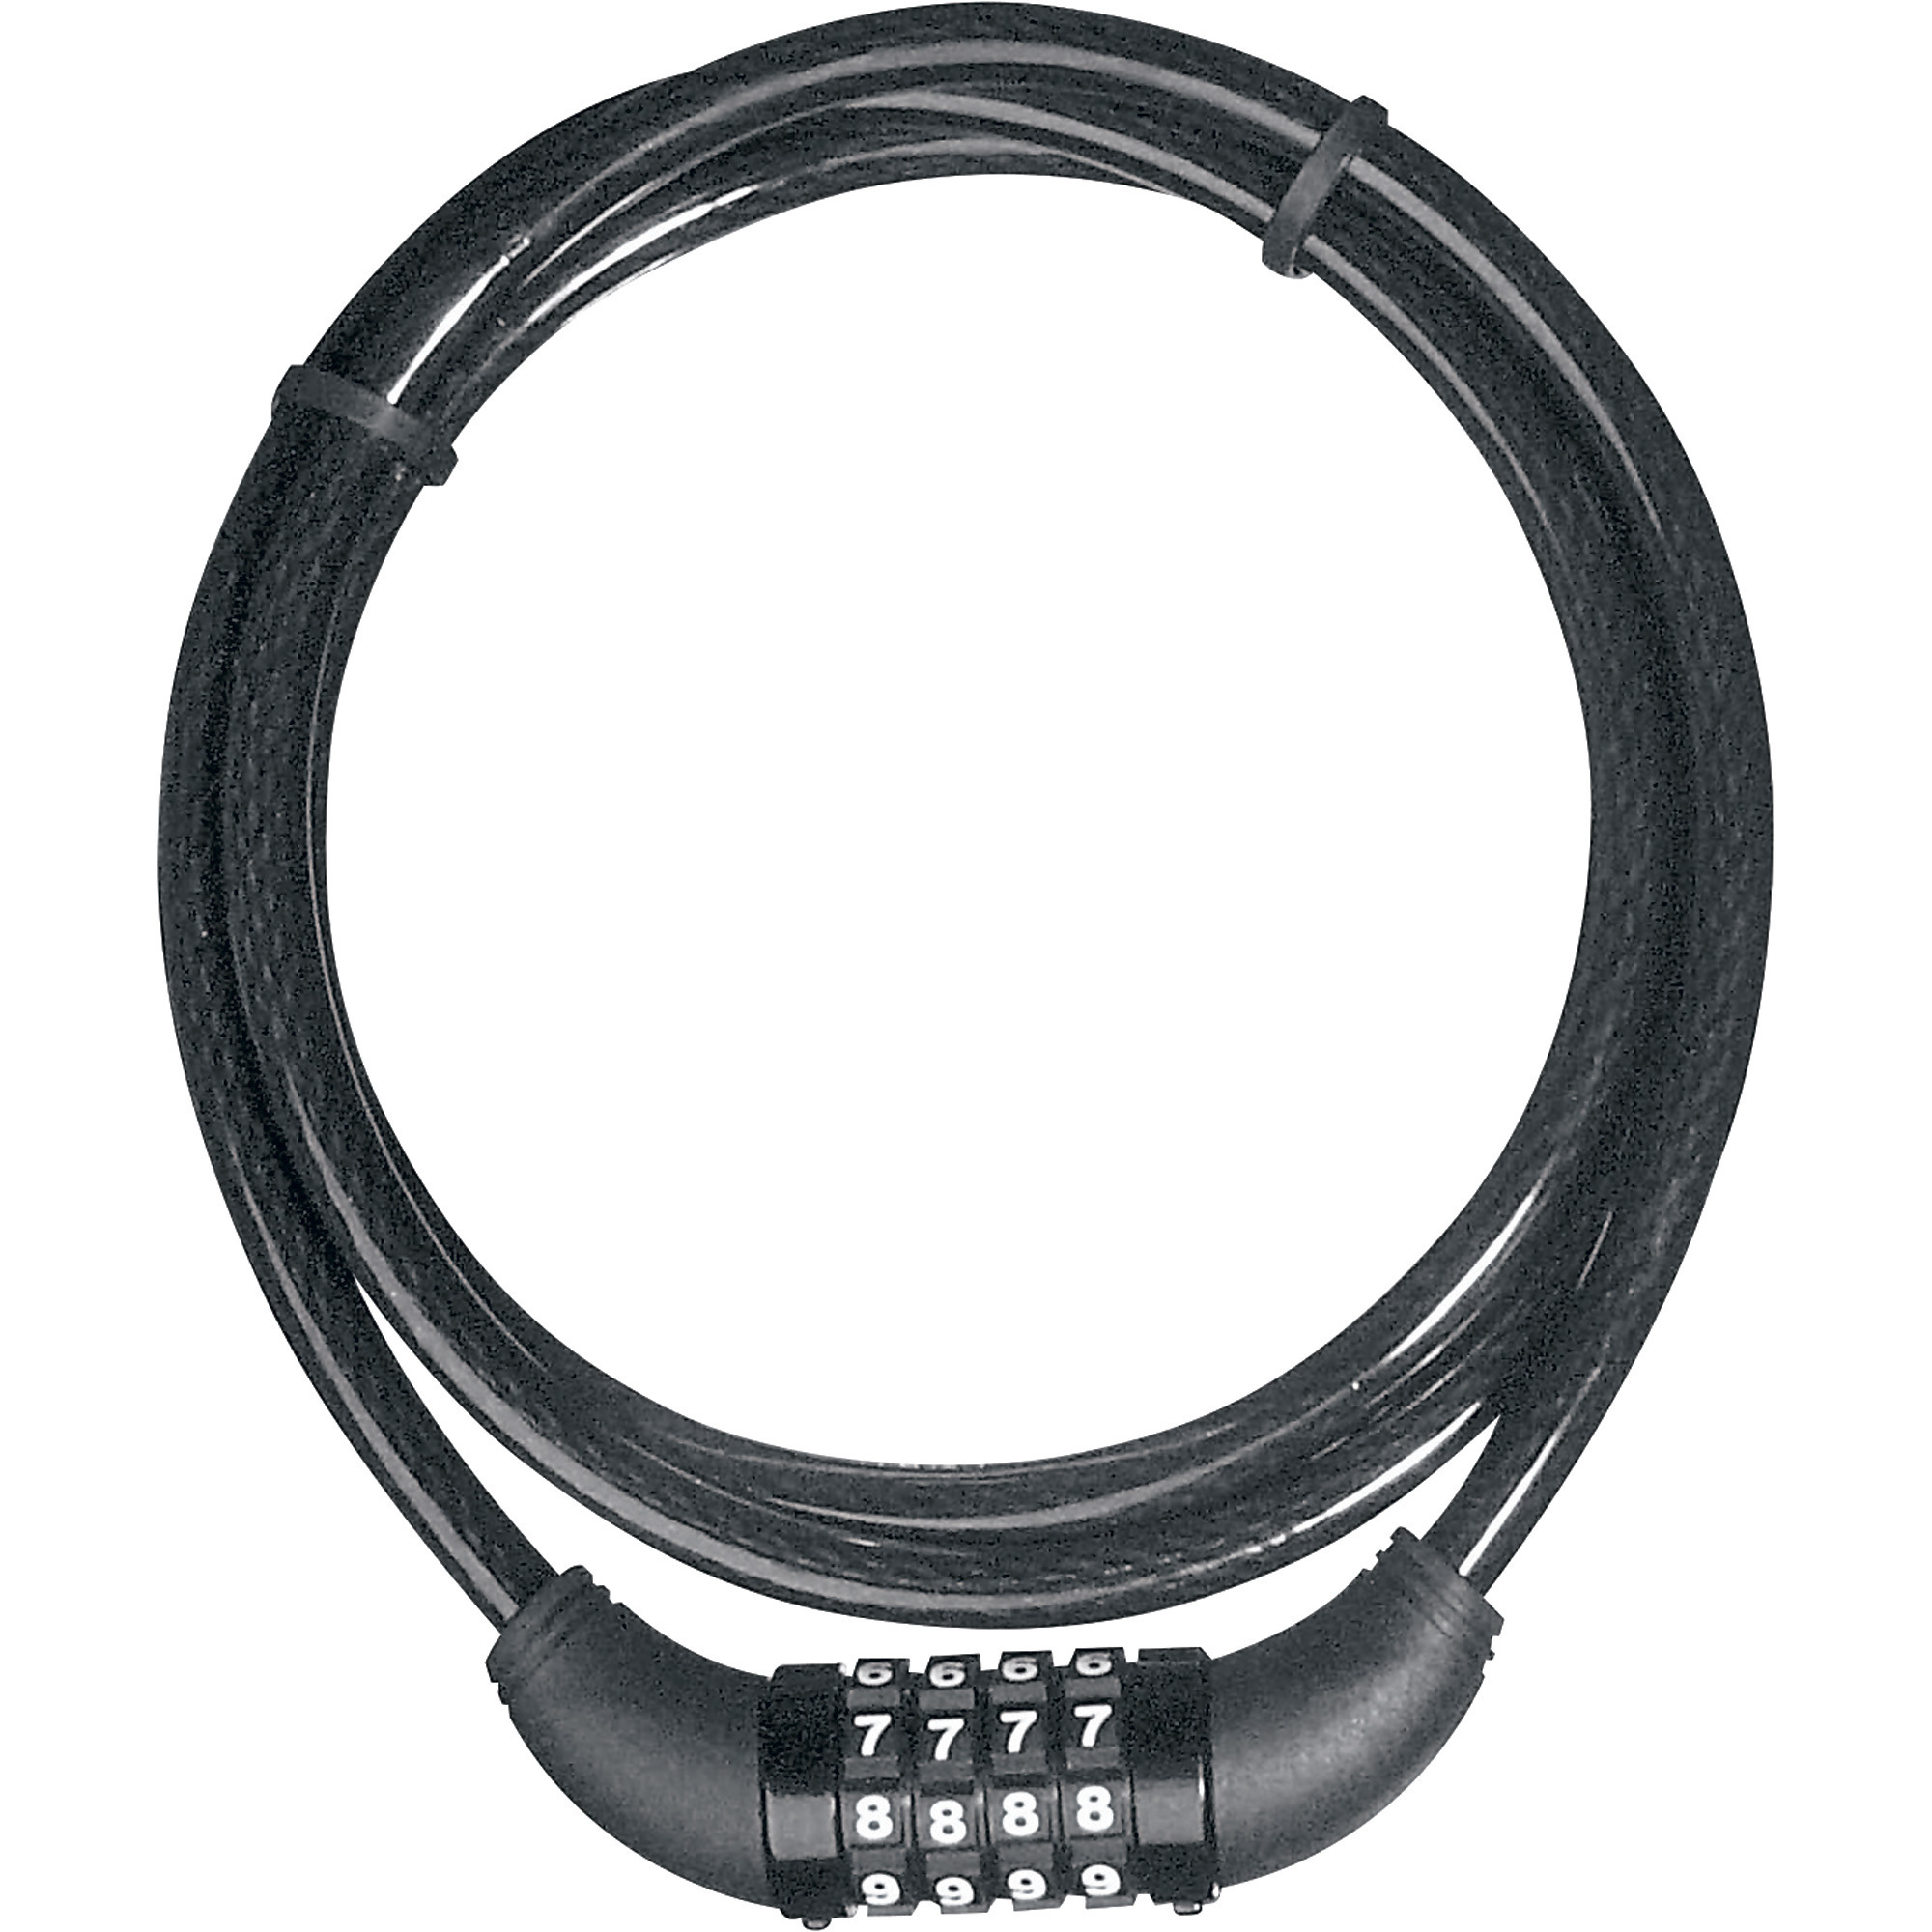 Master Lock 5-Ft. 3/8Inch Diameter Cable with Lock â Model 8119DPF